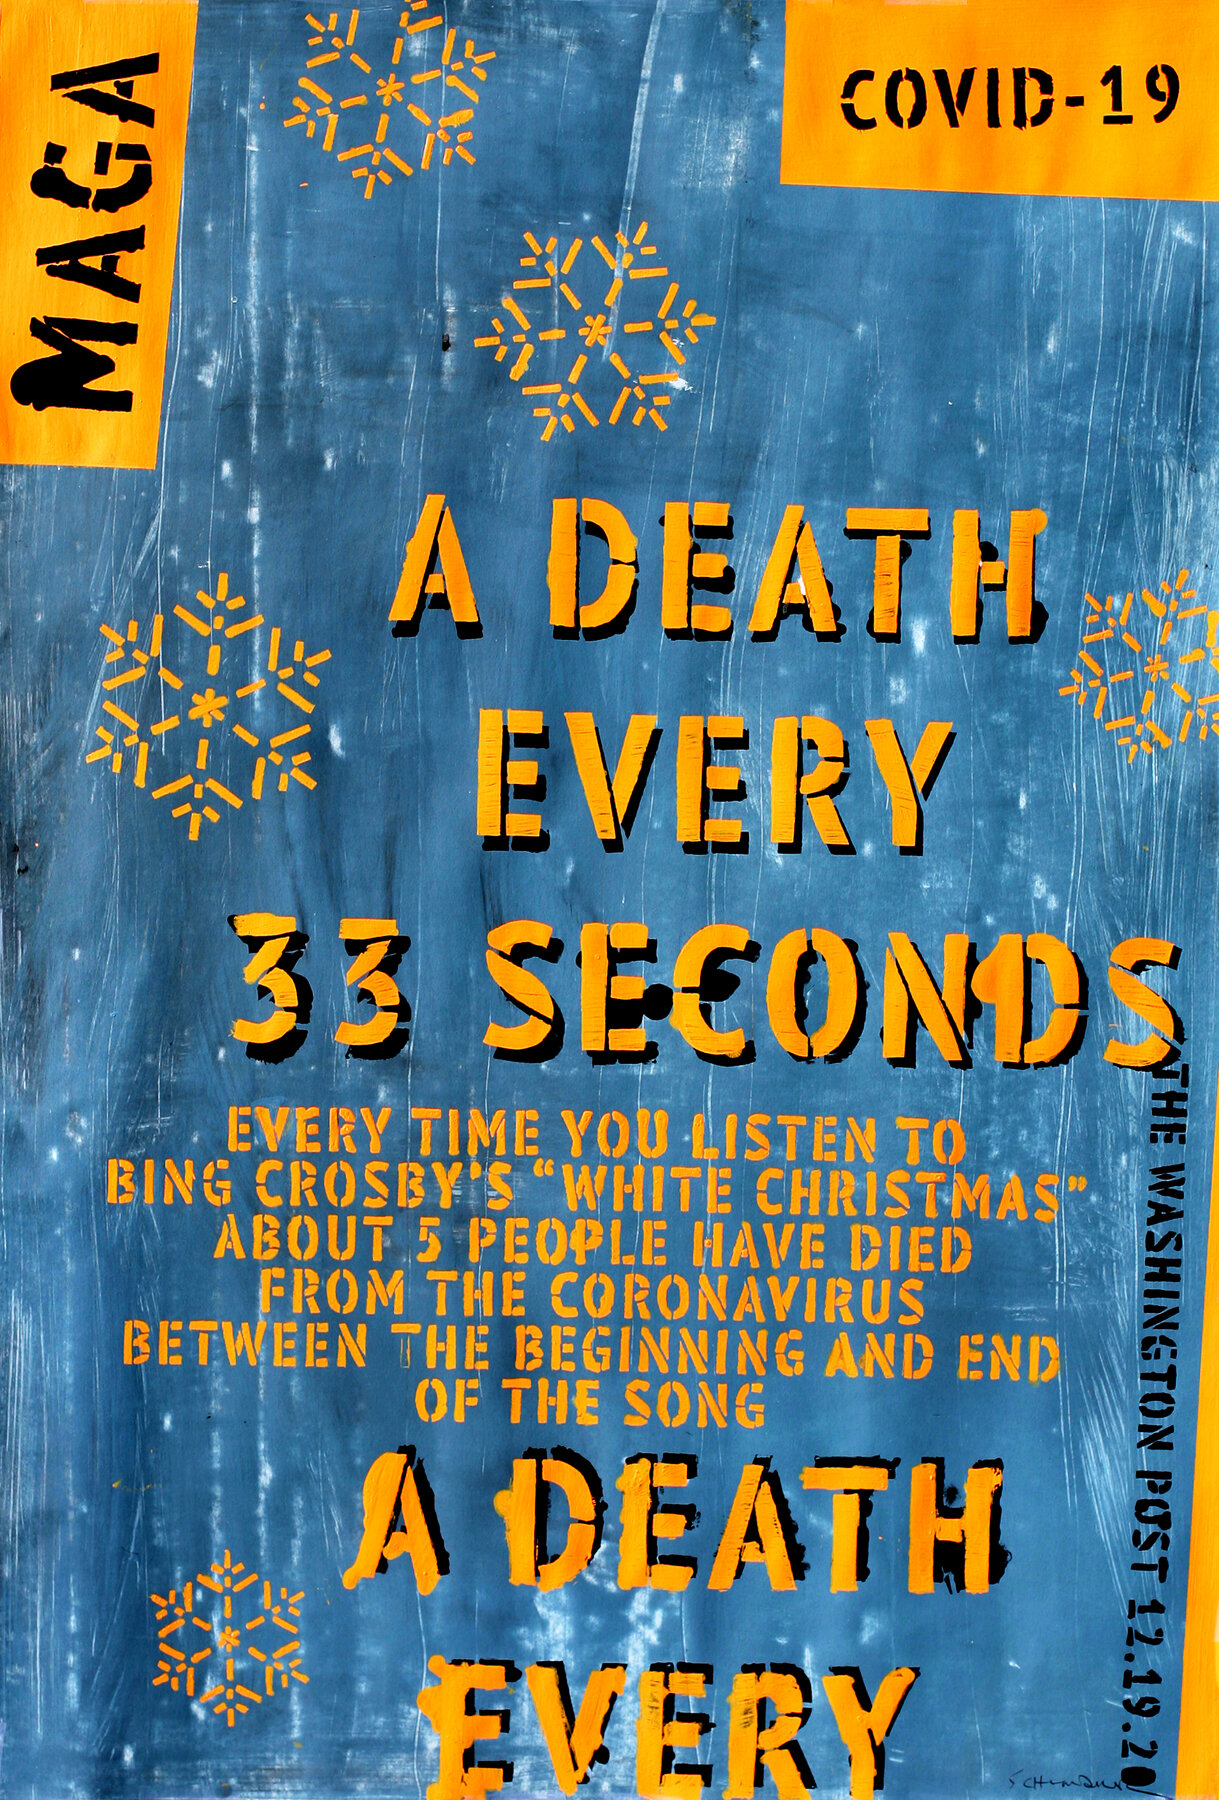 Every 33 Seconds